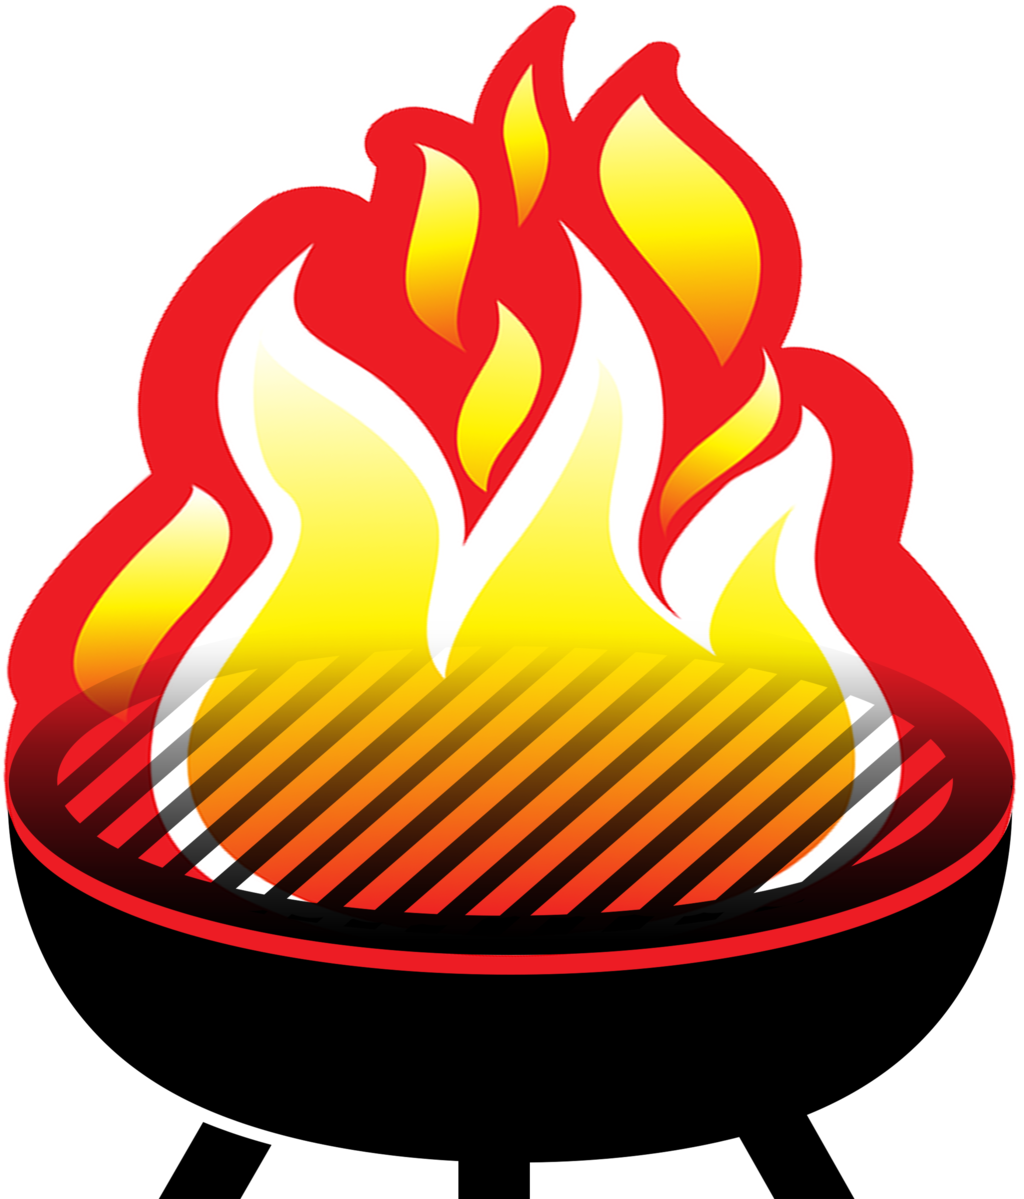 grilling clipart red grill